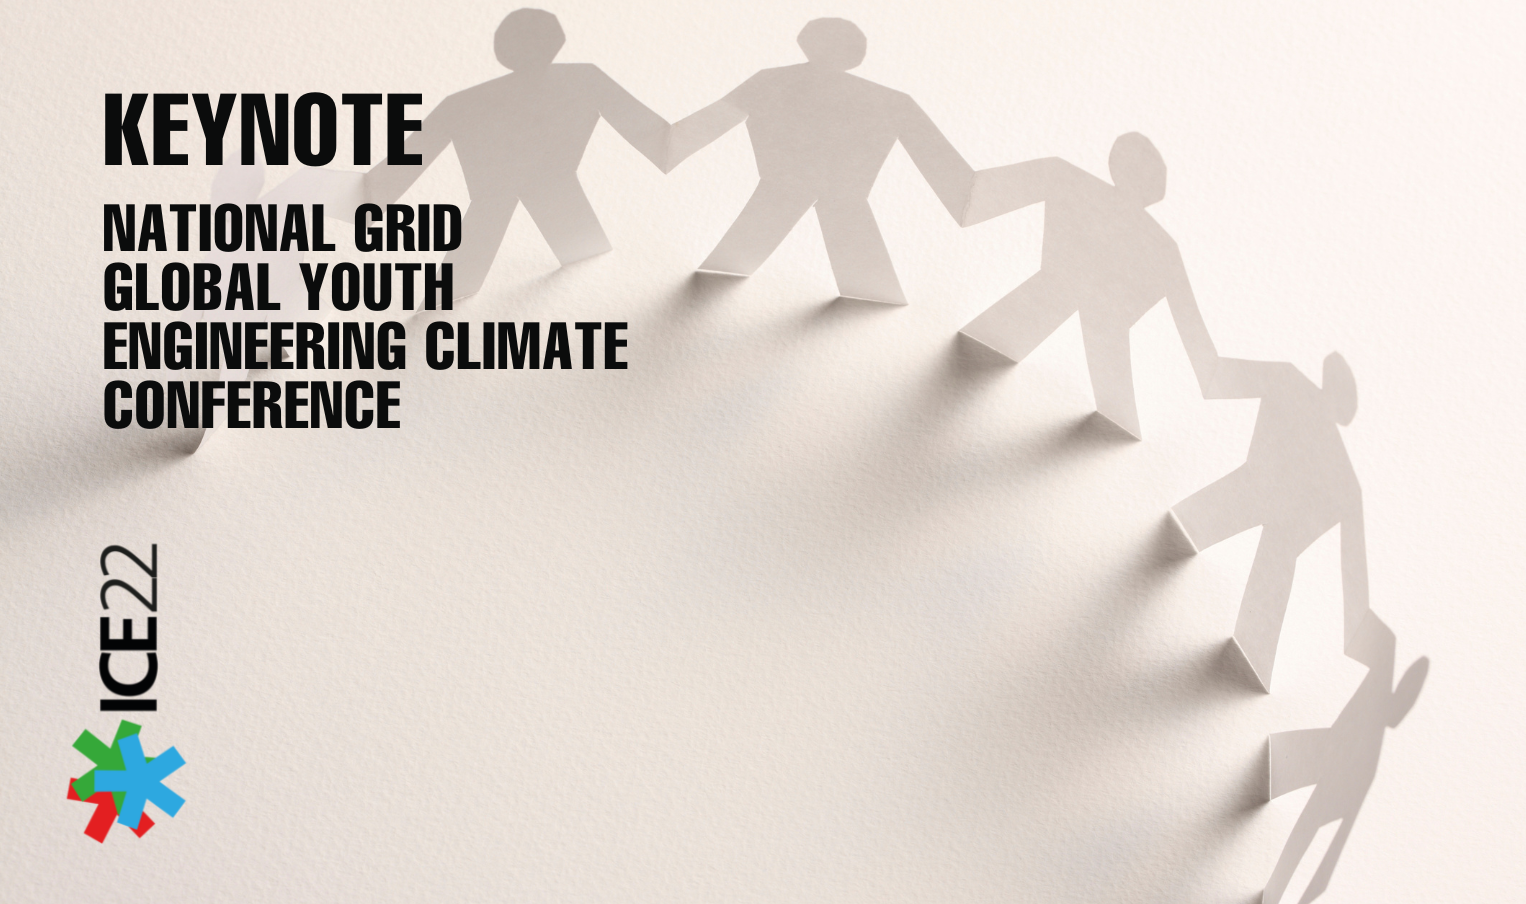 Keynote – National Grid – Global Youth Engineering Climate Conference